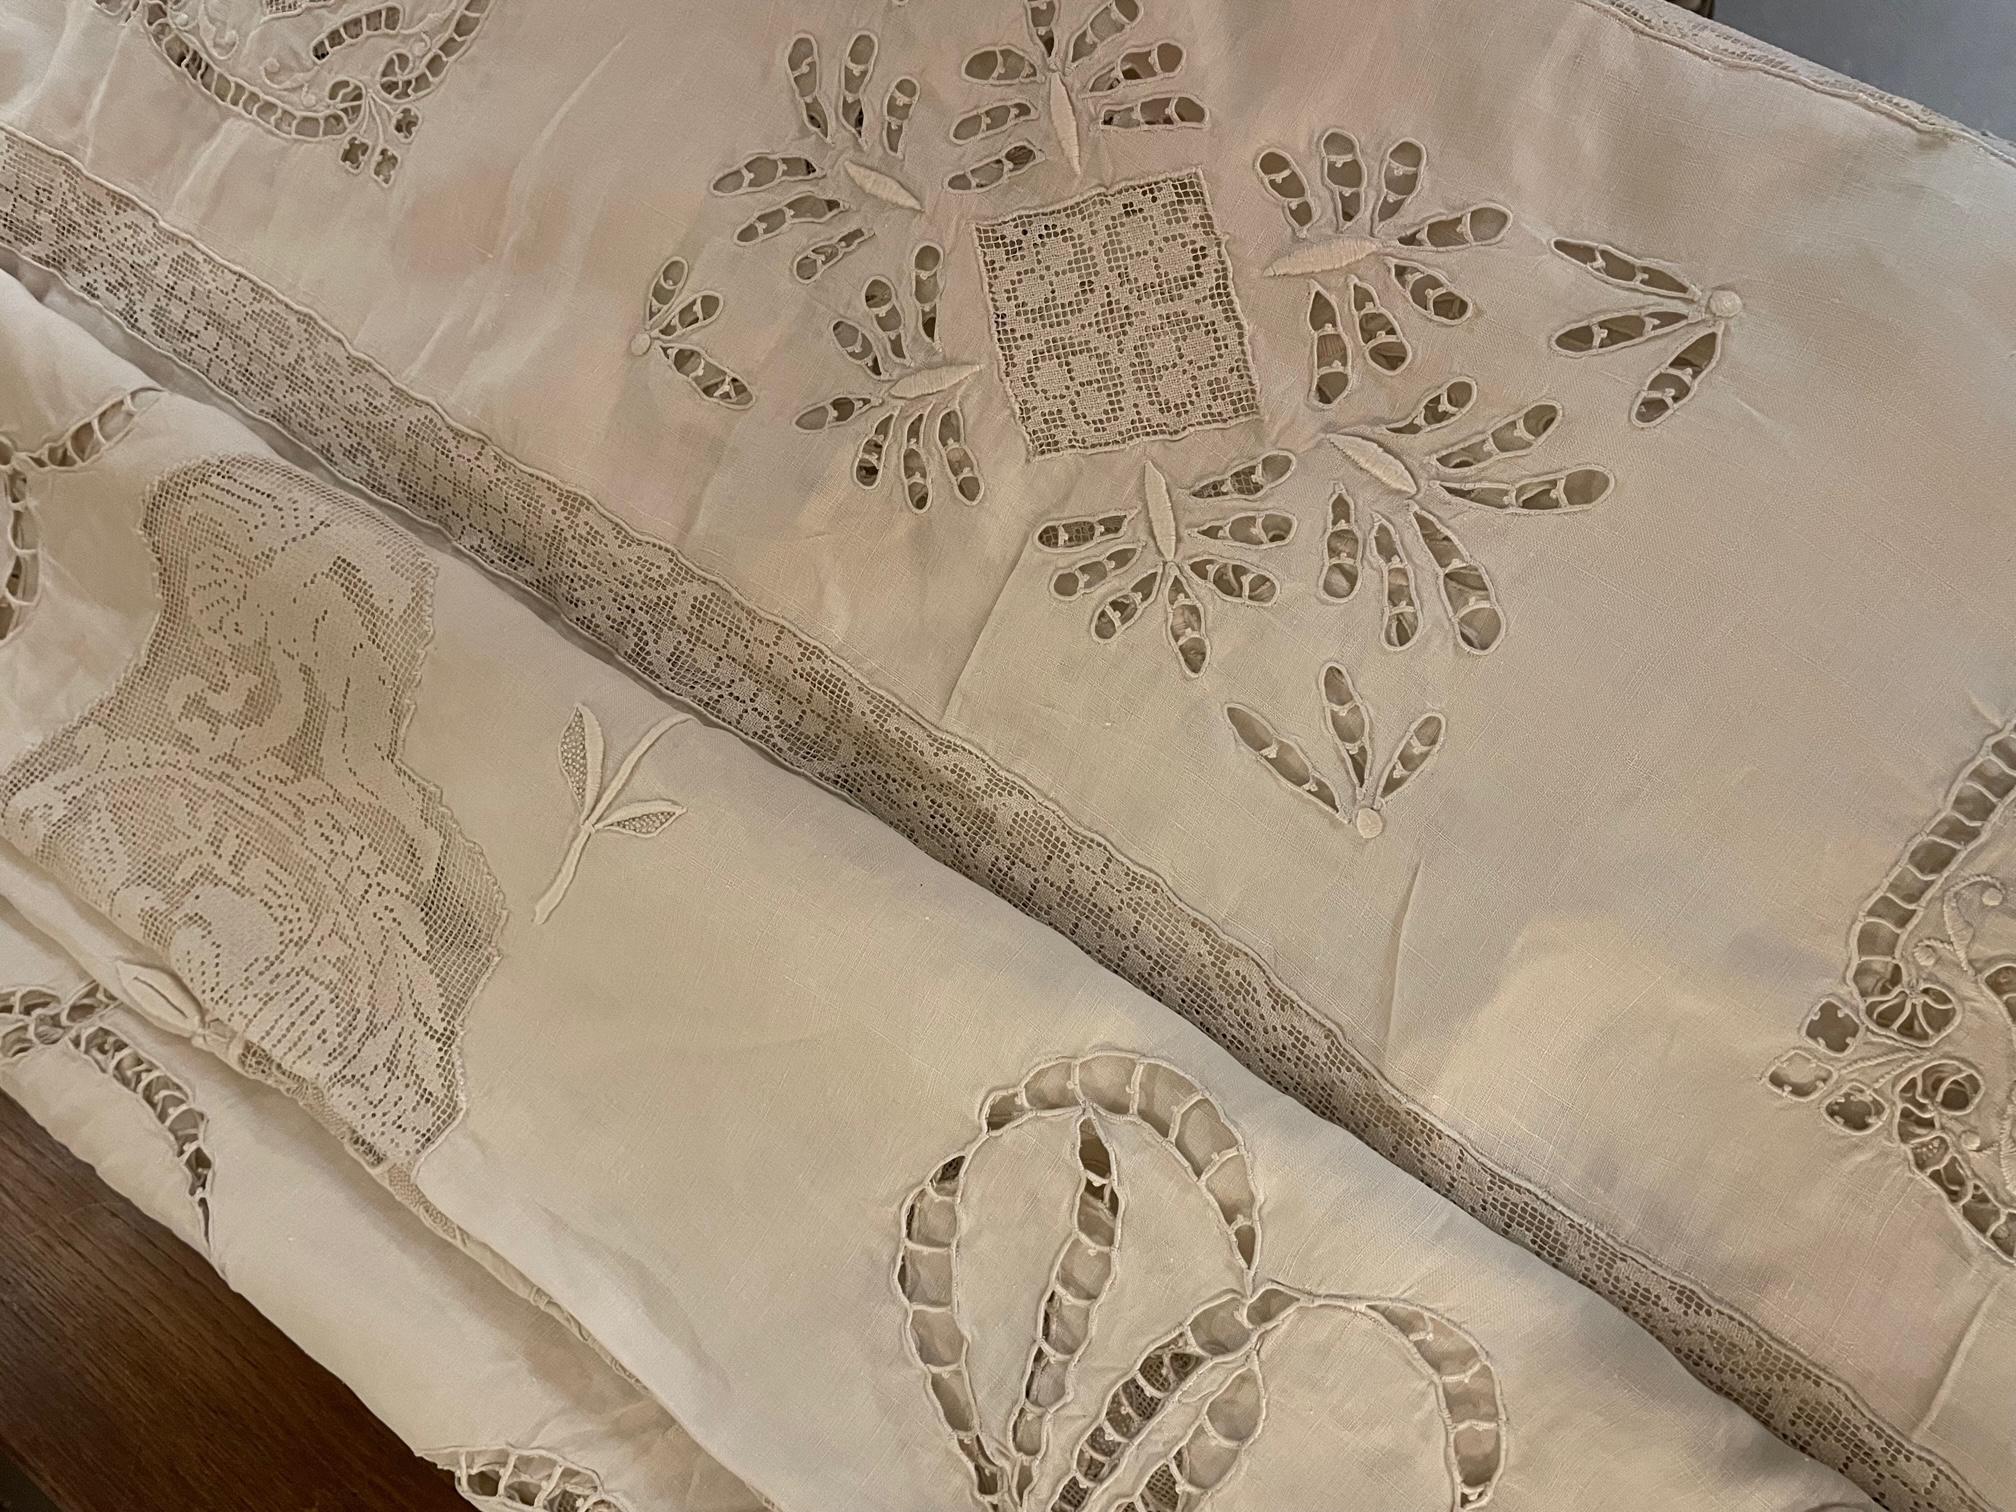 Beautiful and rare 20th century French hand made Linen lace panel from the 1900s. Exceptional details, girl in a medallion in the center of the panel, flowers, bow, angels laced all over the panel. 
Stunning quality and perfect condition.